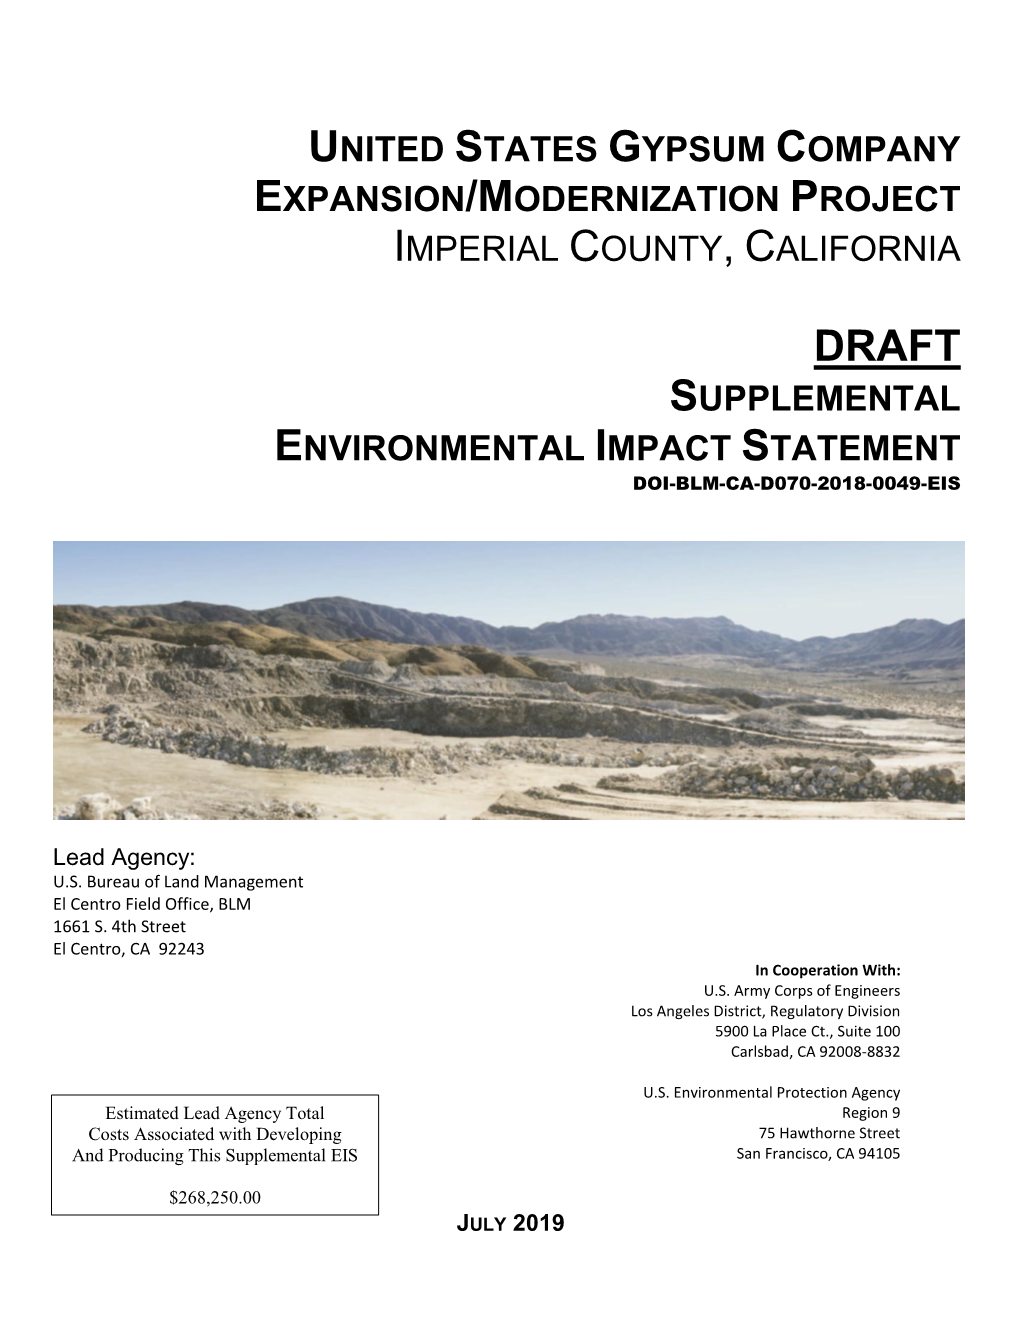 United States Gypsum Company Expansion/Modernization Project Imperial County, California